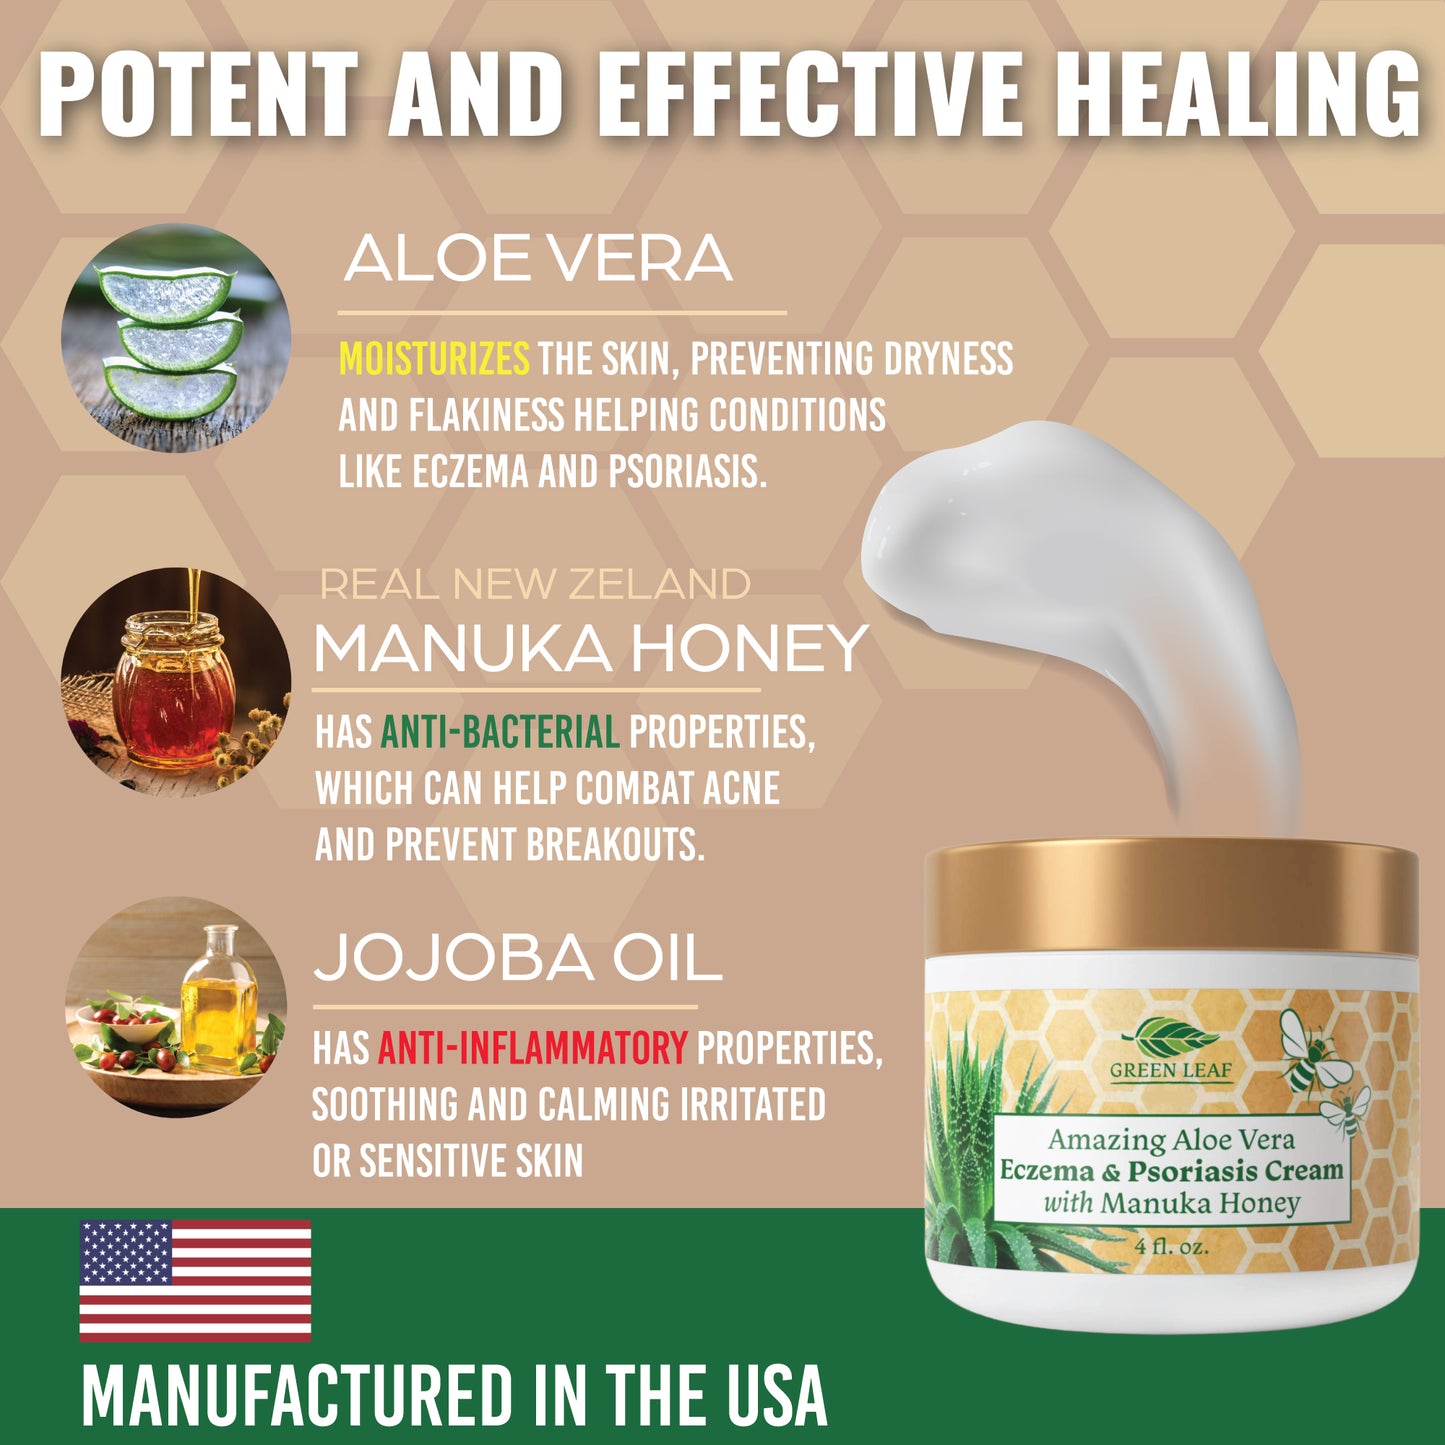 Manuka Honey Eczema Cream Moisturizing Lotion Treatment For Psoriasis Relief - Itchy, Dry Skin Rash Healing Ointment - Skin Soothing Moisturizer For Kids, Adults, Baby Ultra Strength Honey Creme